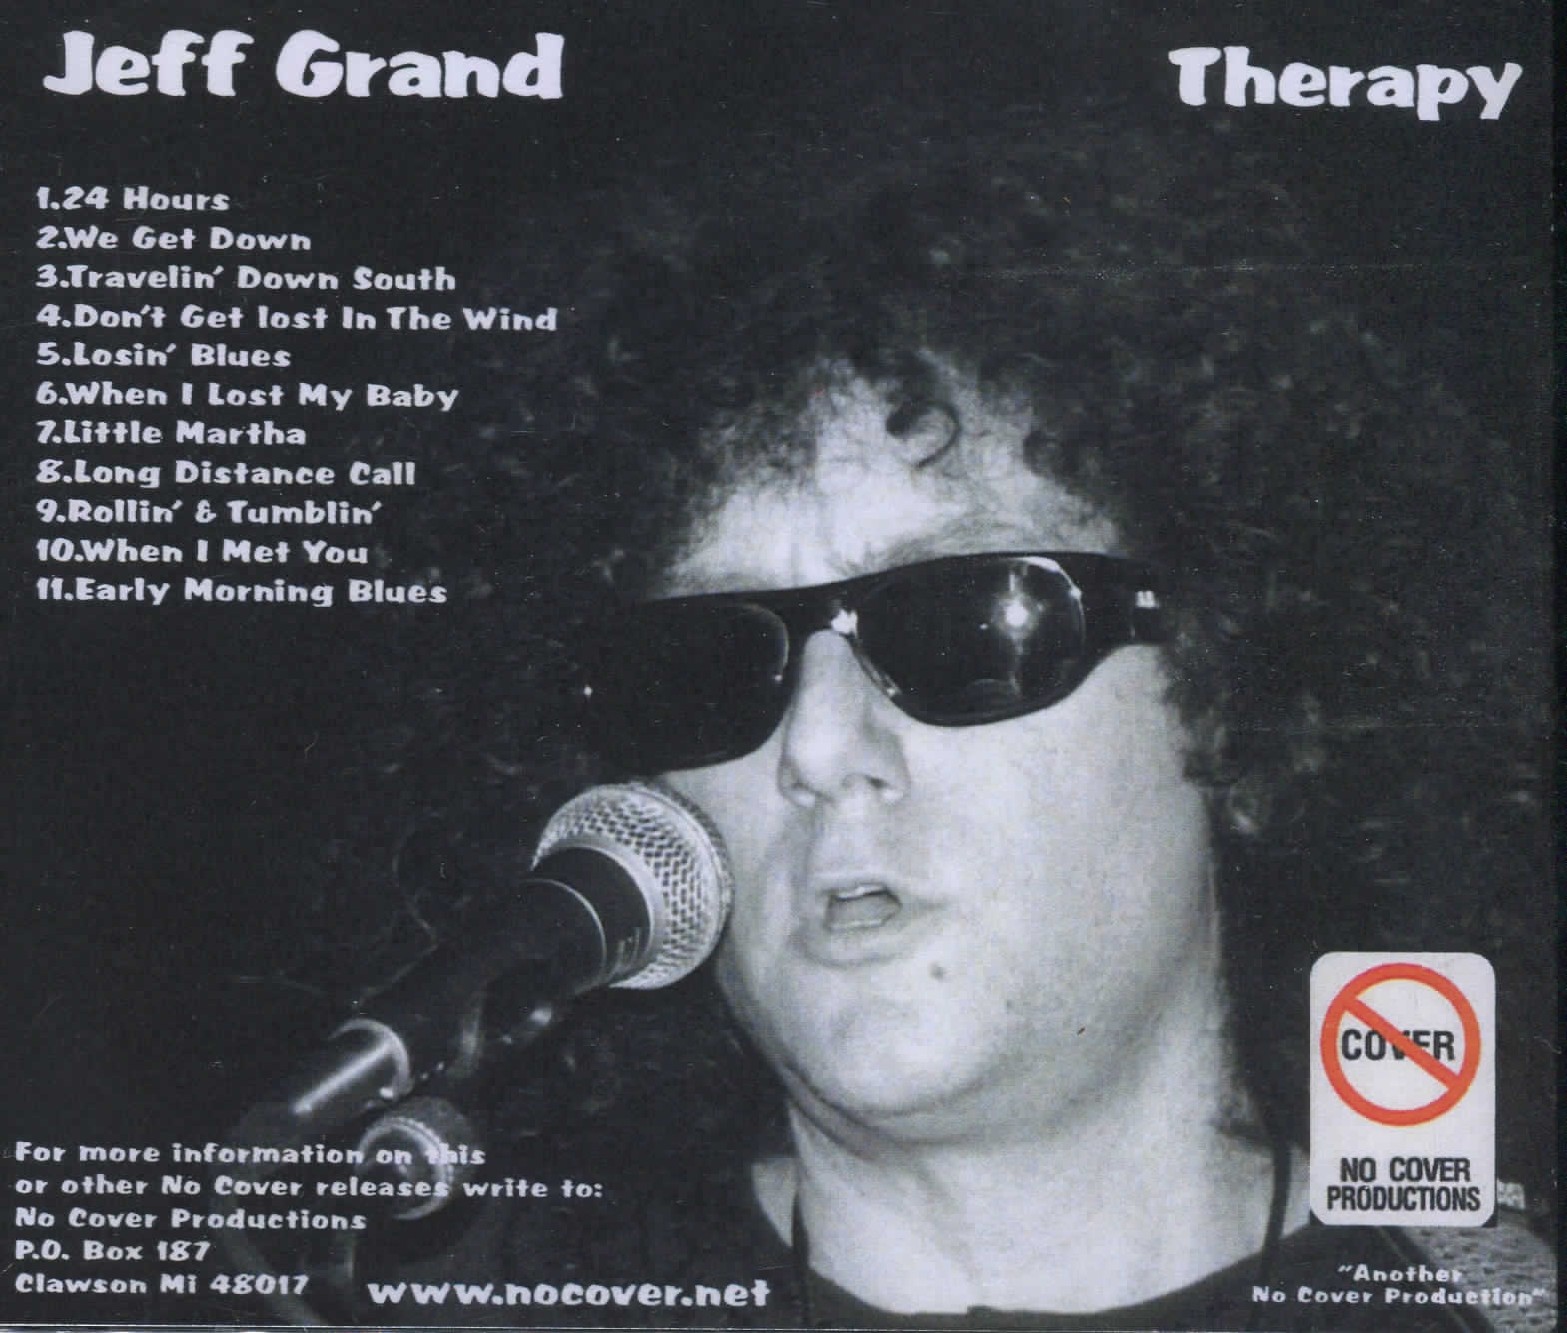 Back cover of "Therapy" CD